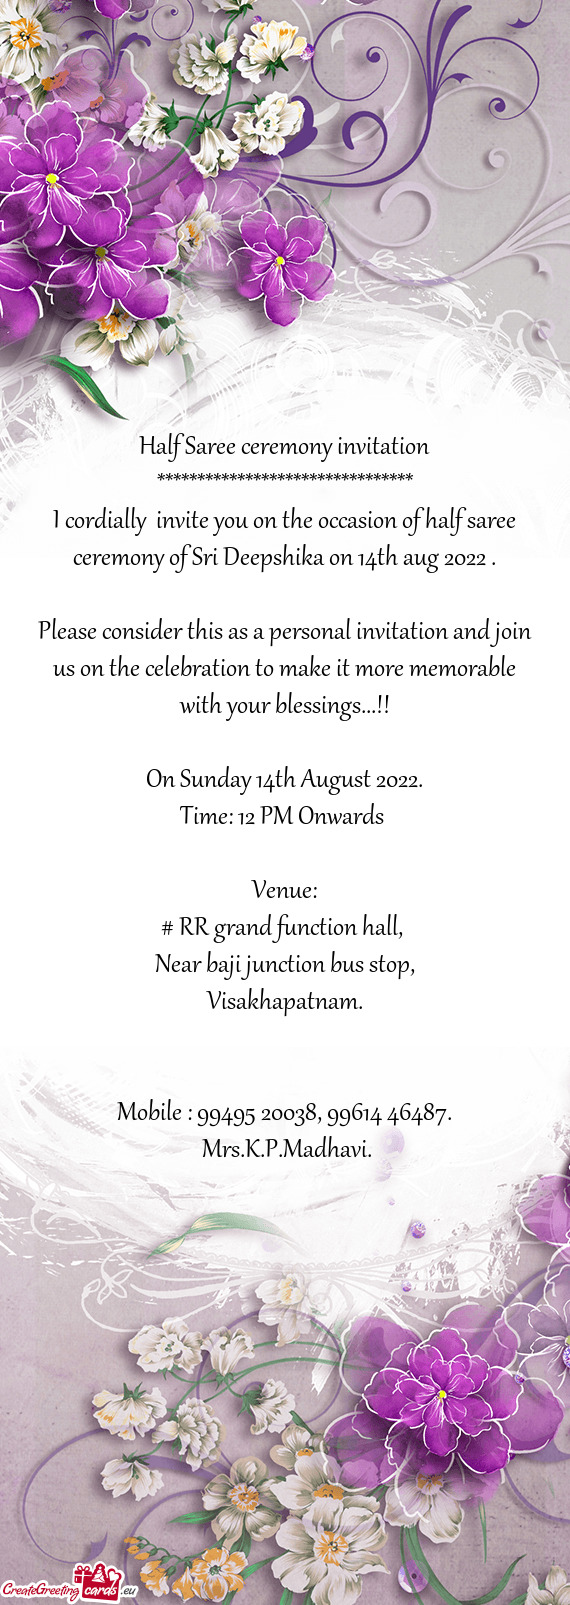 I cordially invite you on the occasion of half saree ceremony of Sri Deepshika on 14th aug 2022